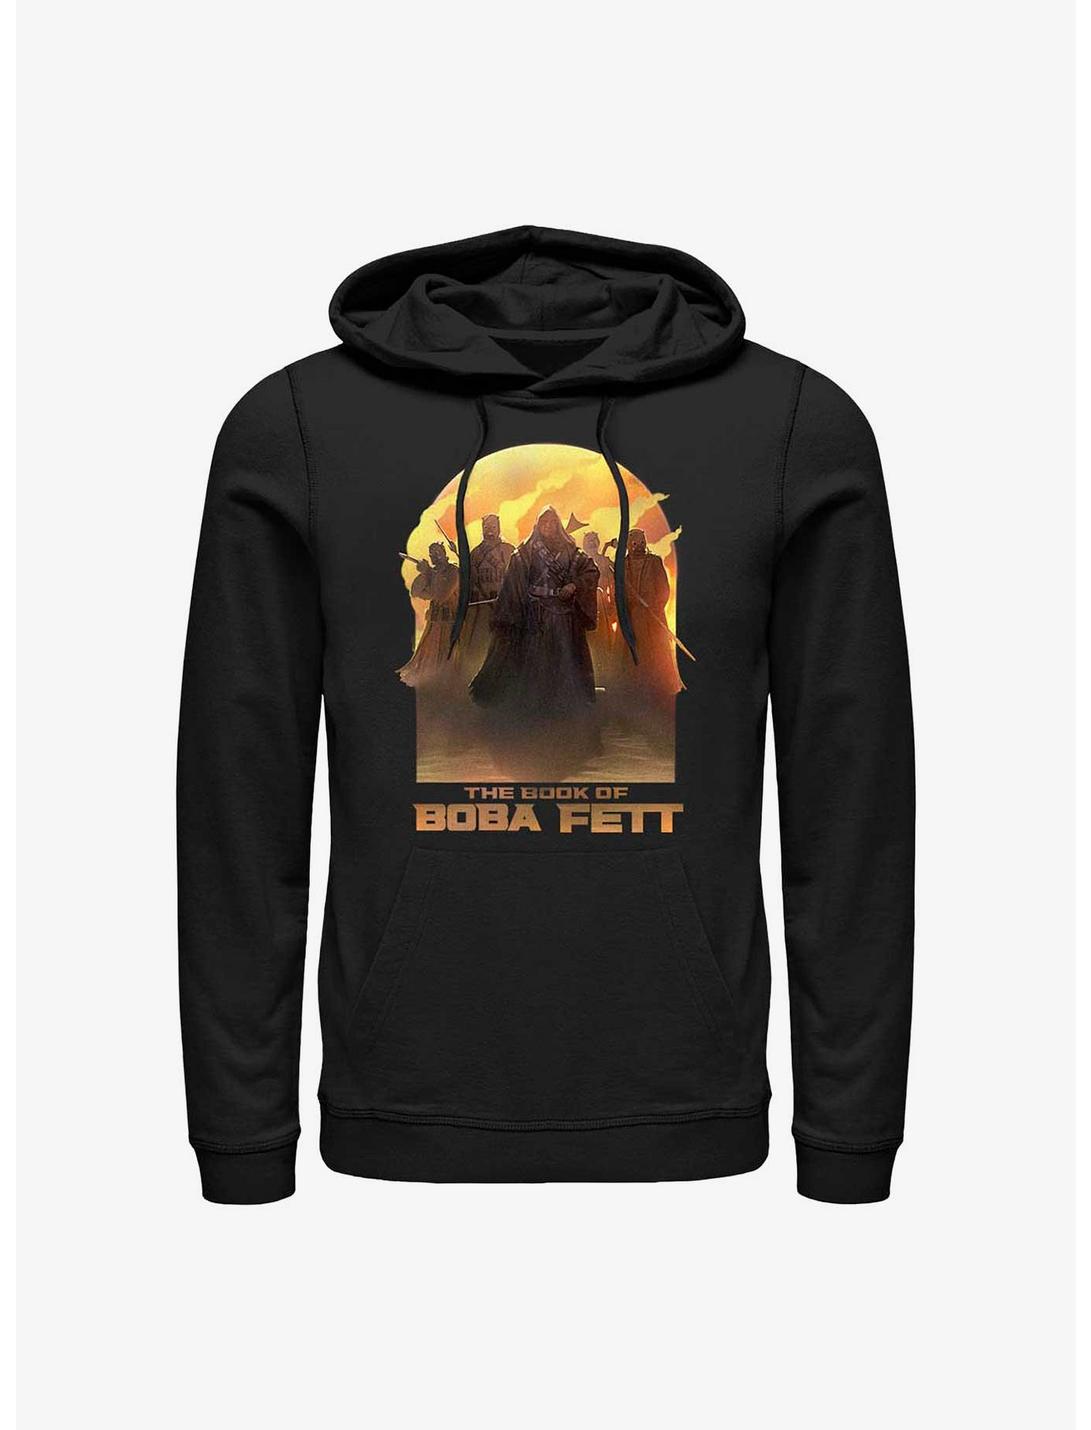 Star Wars Book of Boba Fett Leading By Example Hoodie, BLACK, hi-res